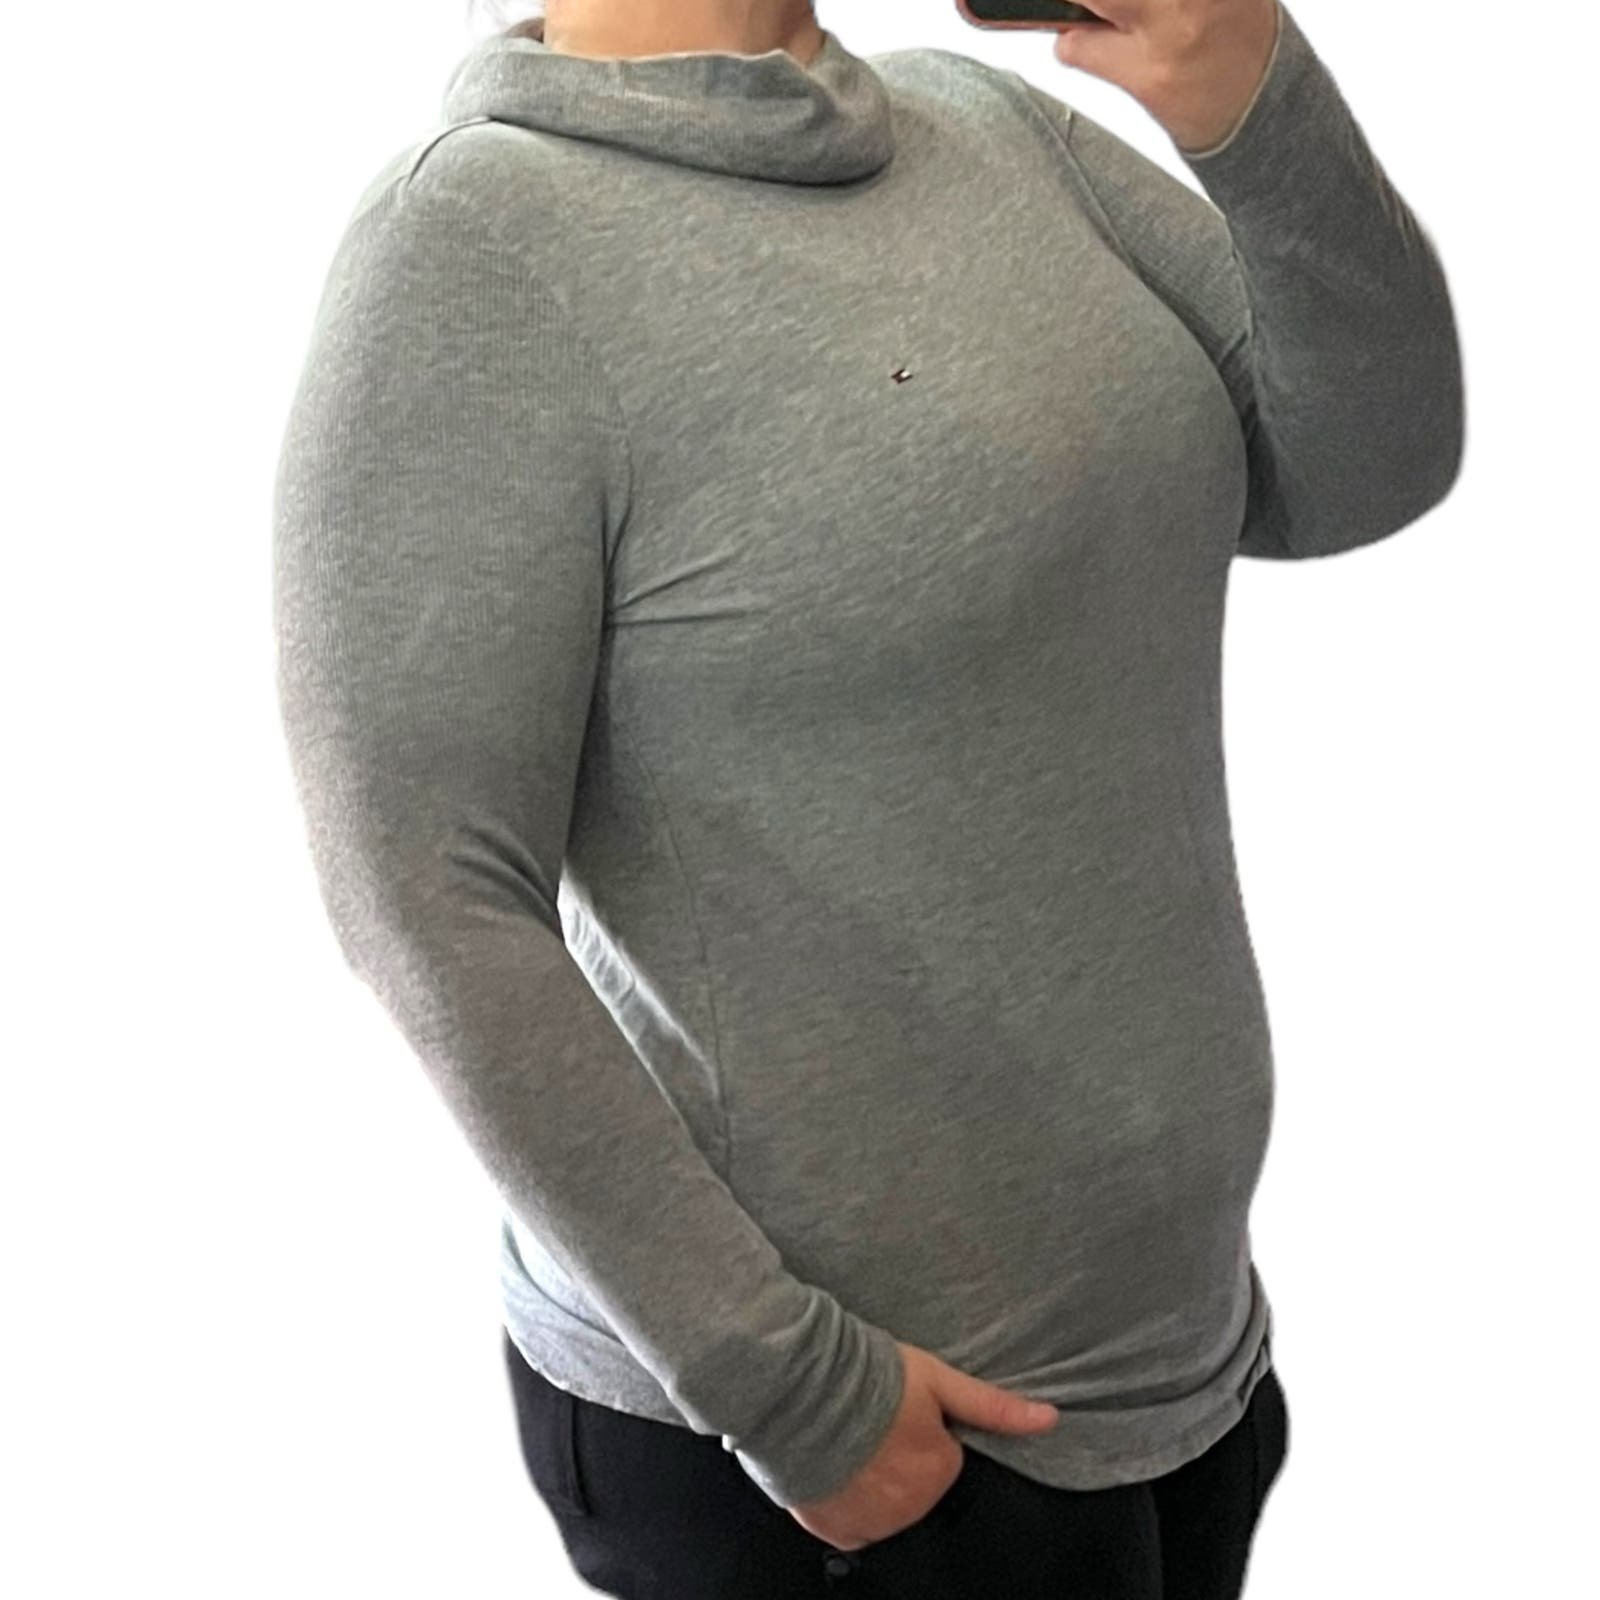 Authentic Tommy Hilfiger MEDIUM Ribbed Arm Long Sleeve Pullover Turtleneck PjOjN56MN online store